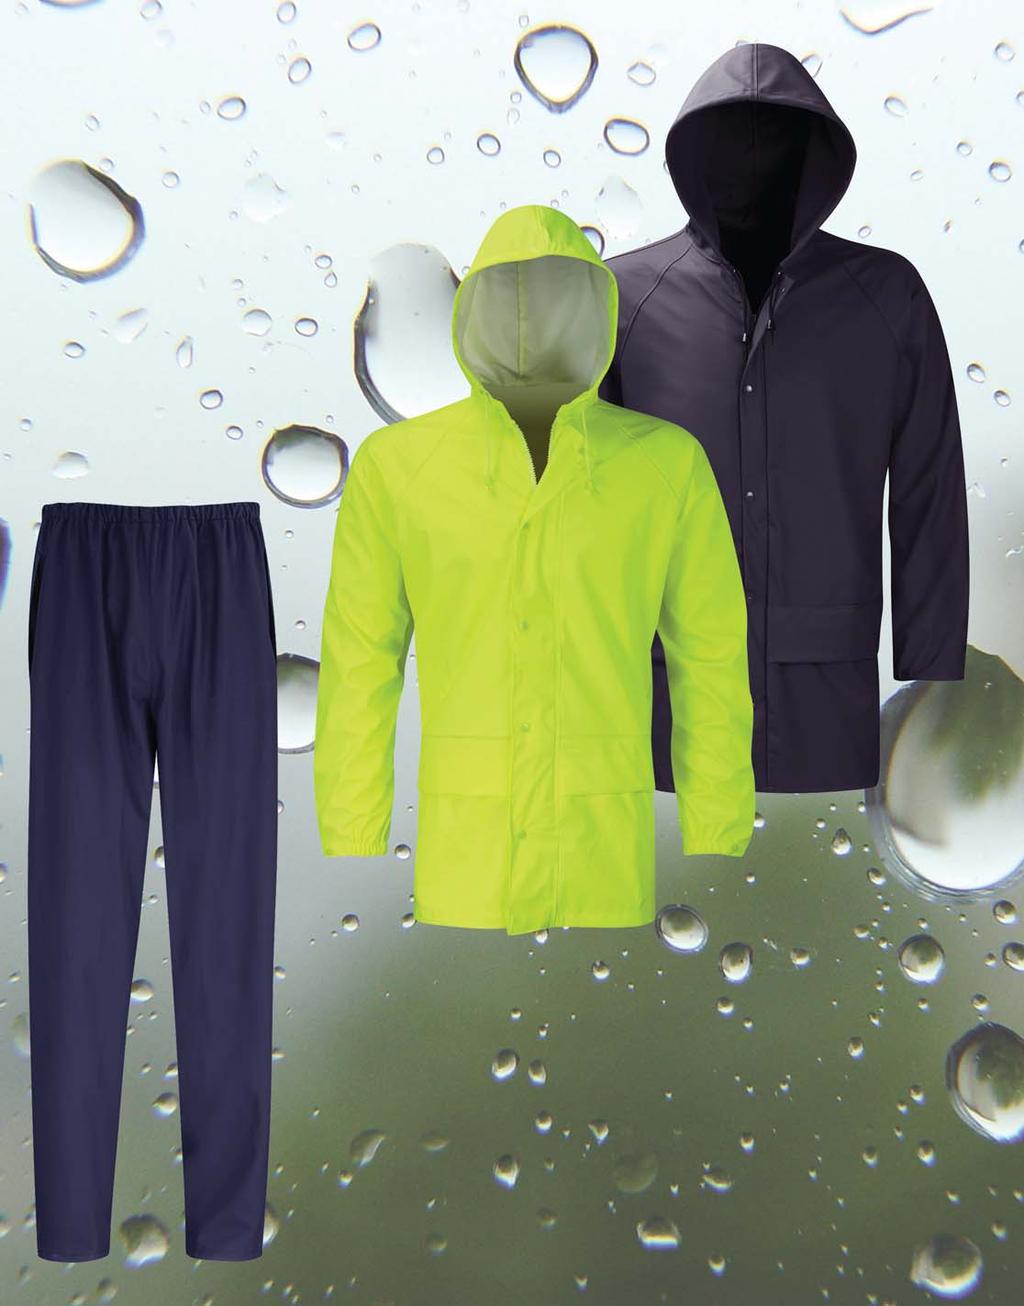 FOUL WEATHER PROTECTION FOUL WEATHER PROTECTION PADDED / UNPADDED JACKET PU Coated Polyester Knitted Fabric. Taped, Stitched & Welded Seams. Heat Stamped at Stress Points.